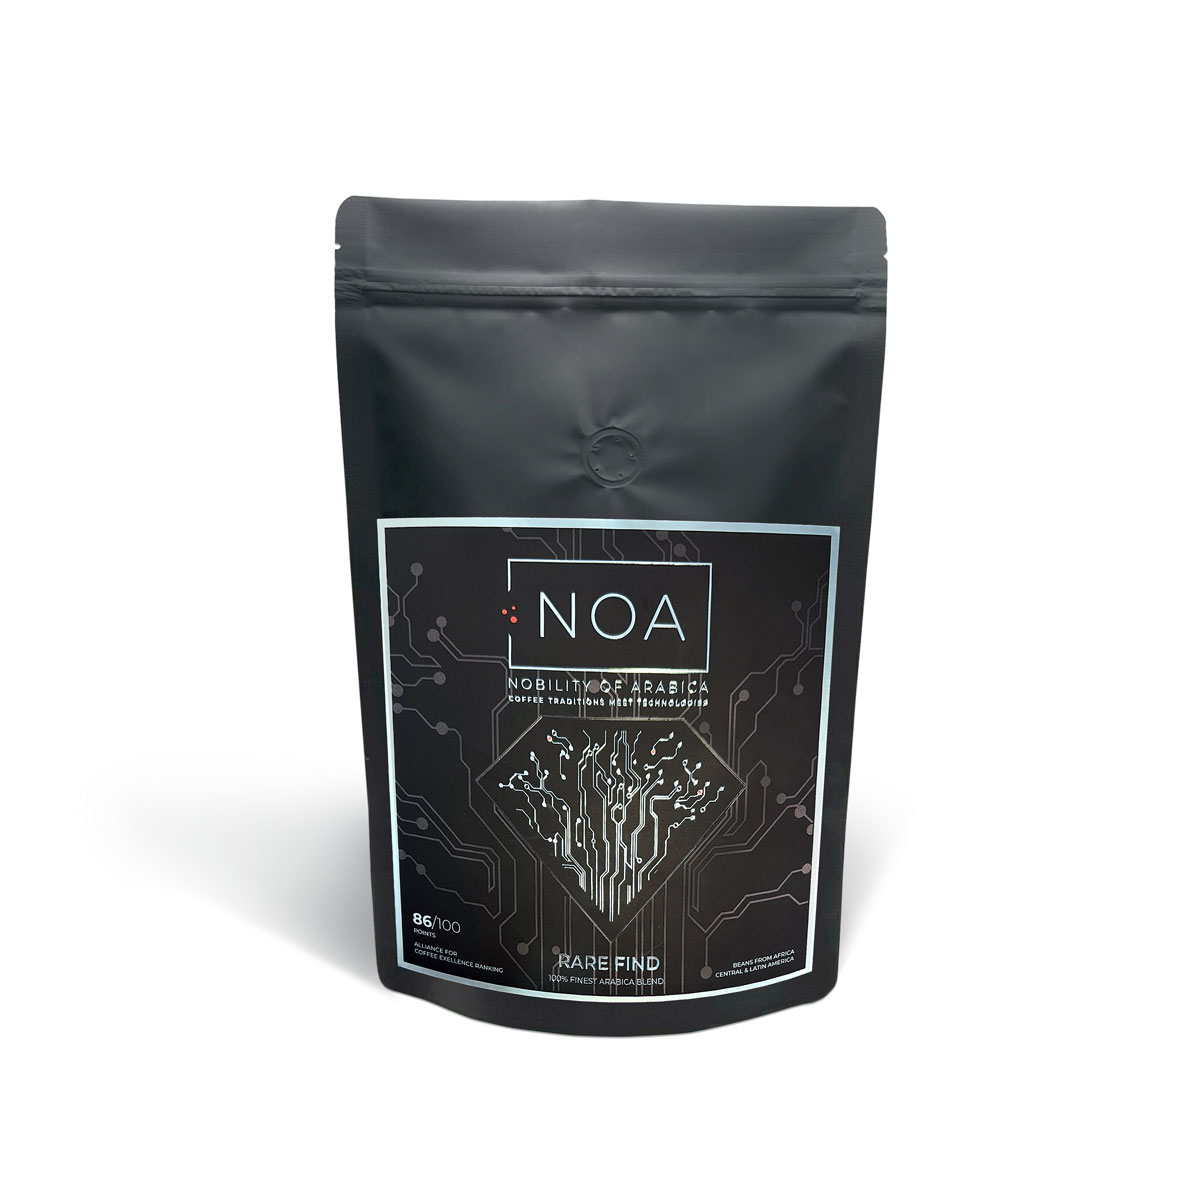 NOA Rare find blend мляно кафе 200гр | Specialty Coffee | Кафе |